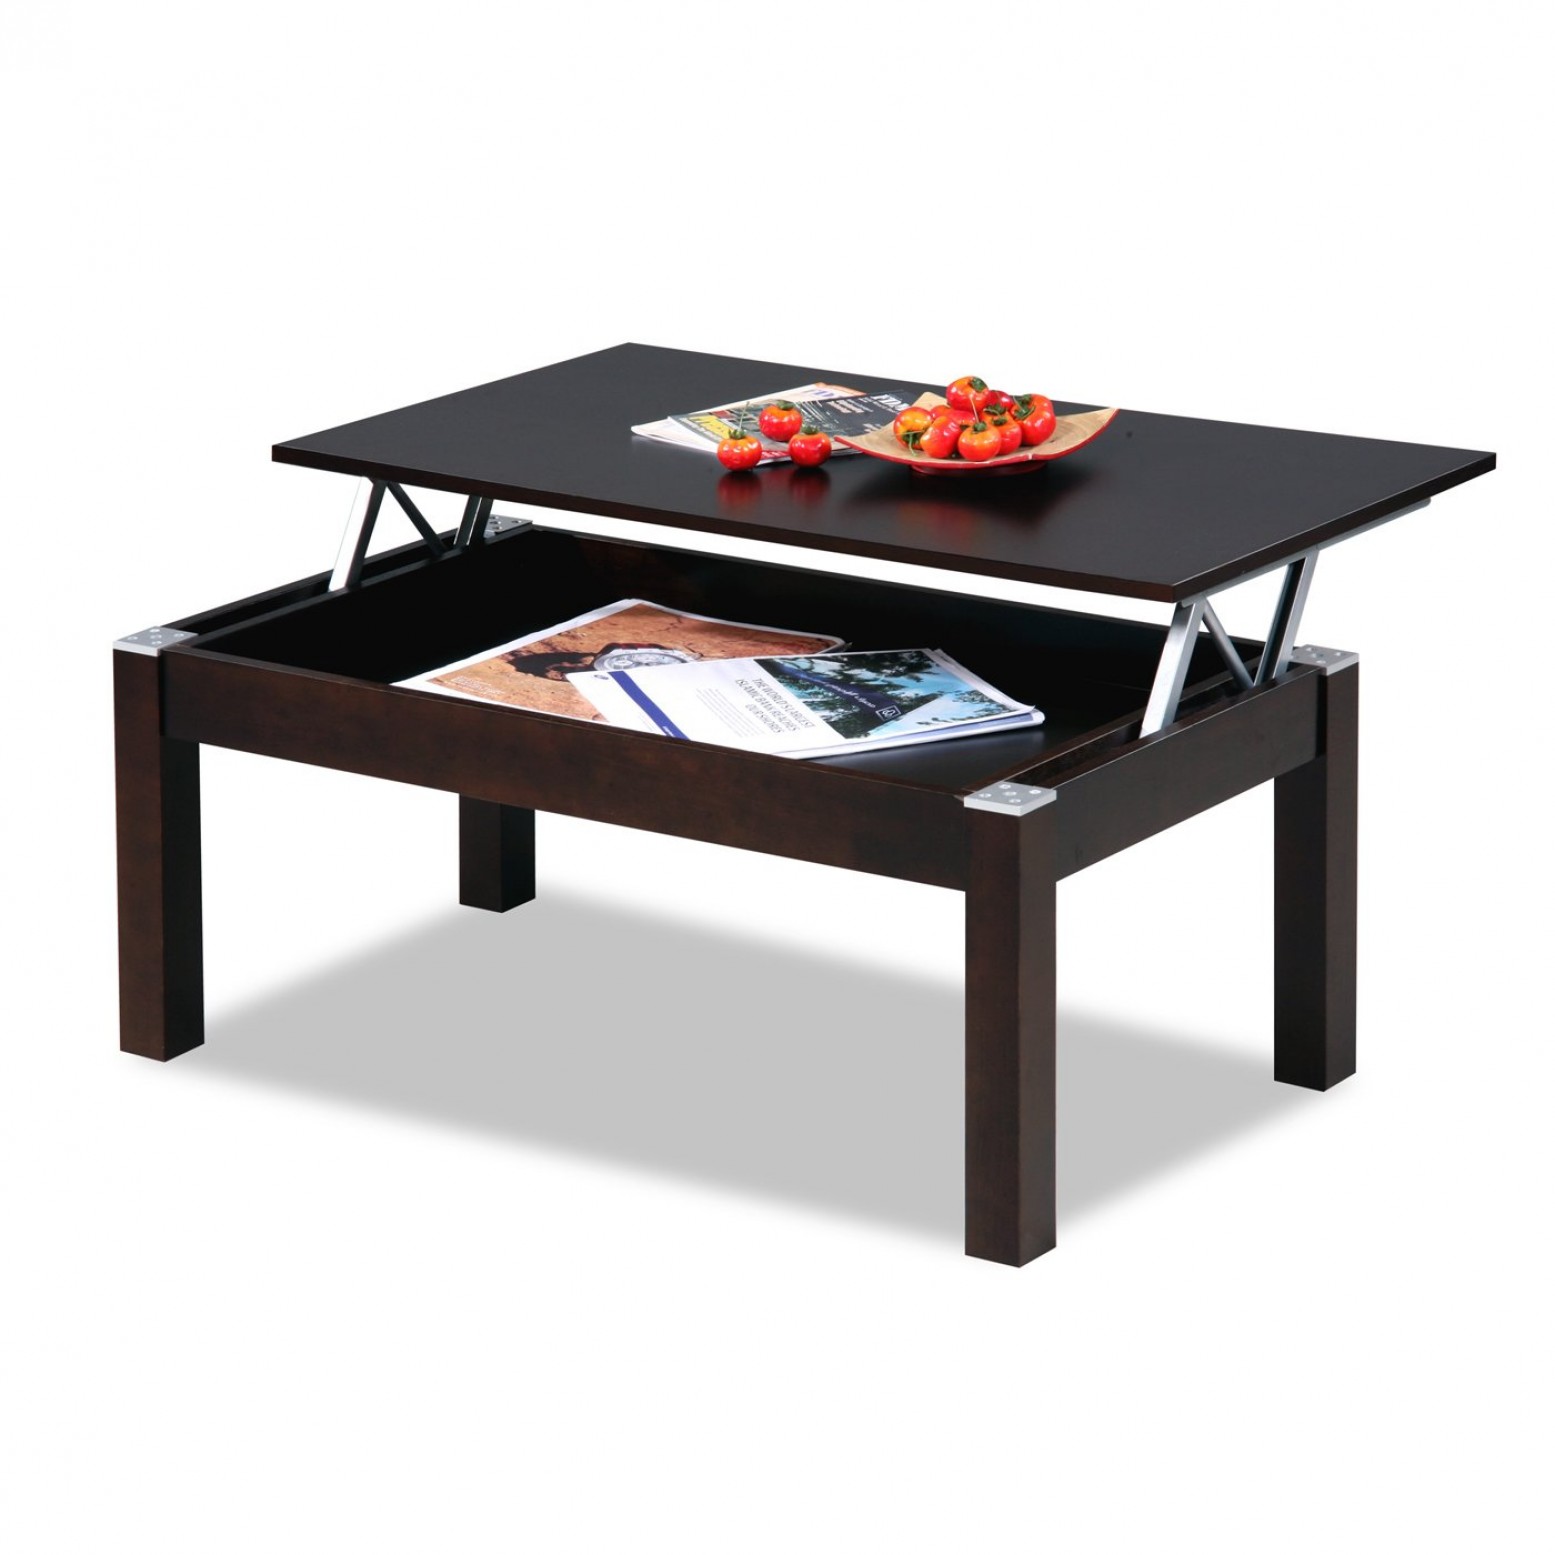 Cota 18 Coffee Table Buy Online At Best Price